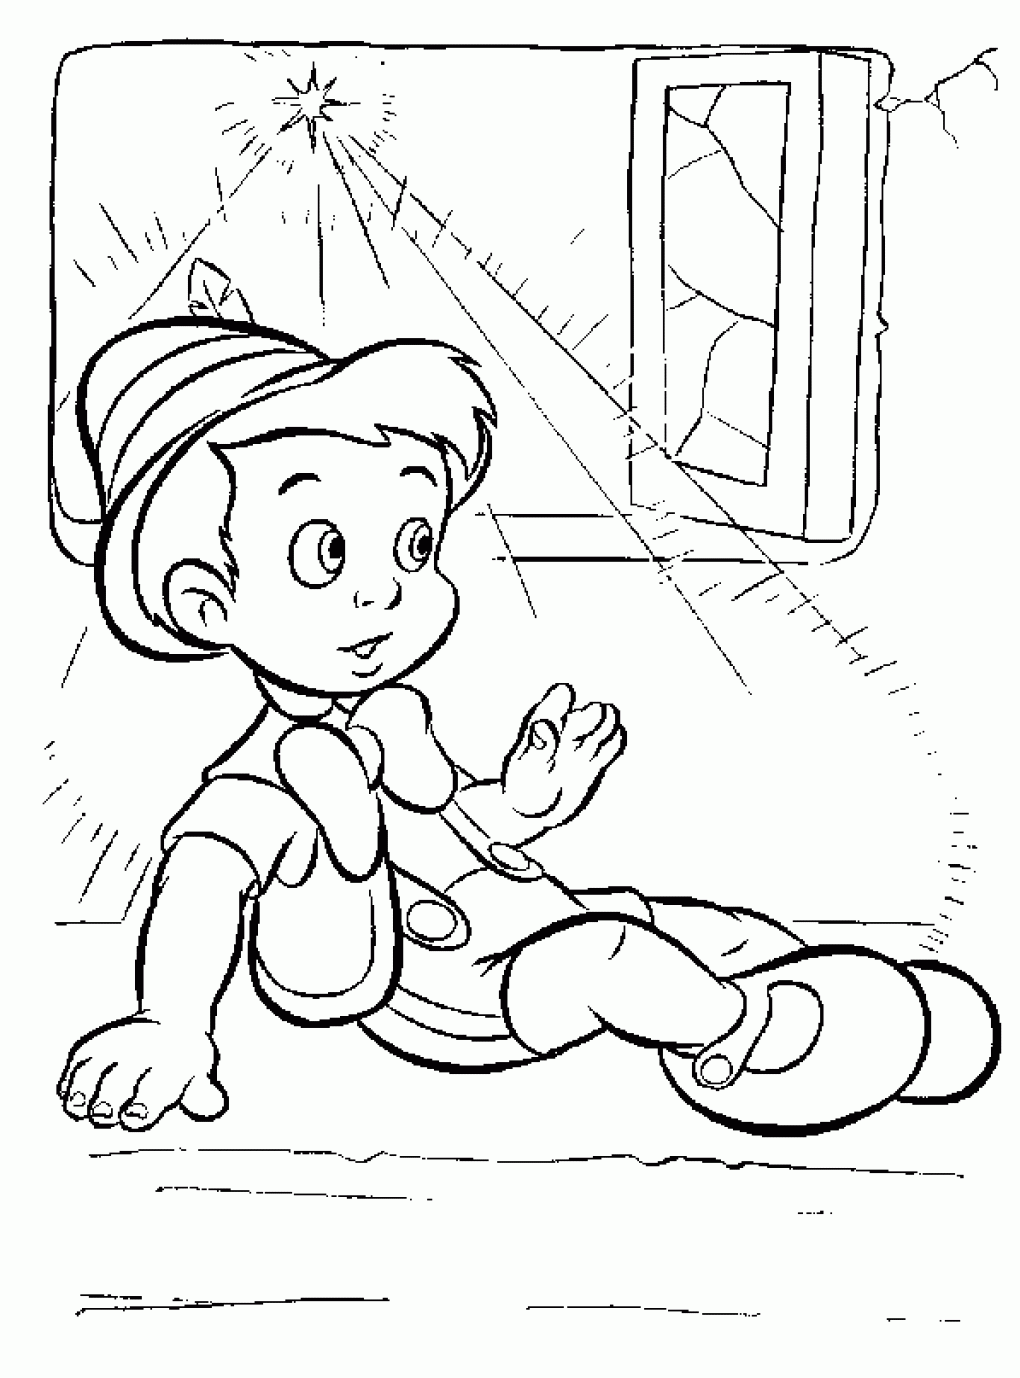 pinocchio coloring pages pinocchio coloring pages to download and print for free coloring pages pinocchio 